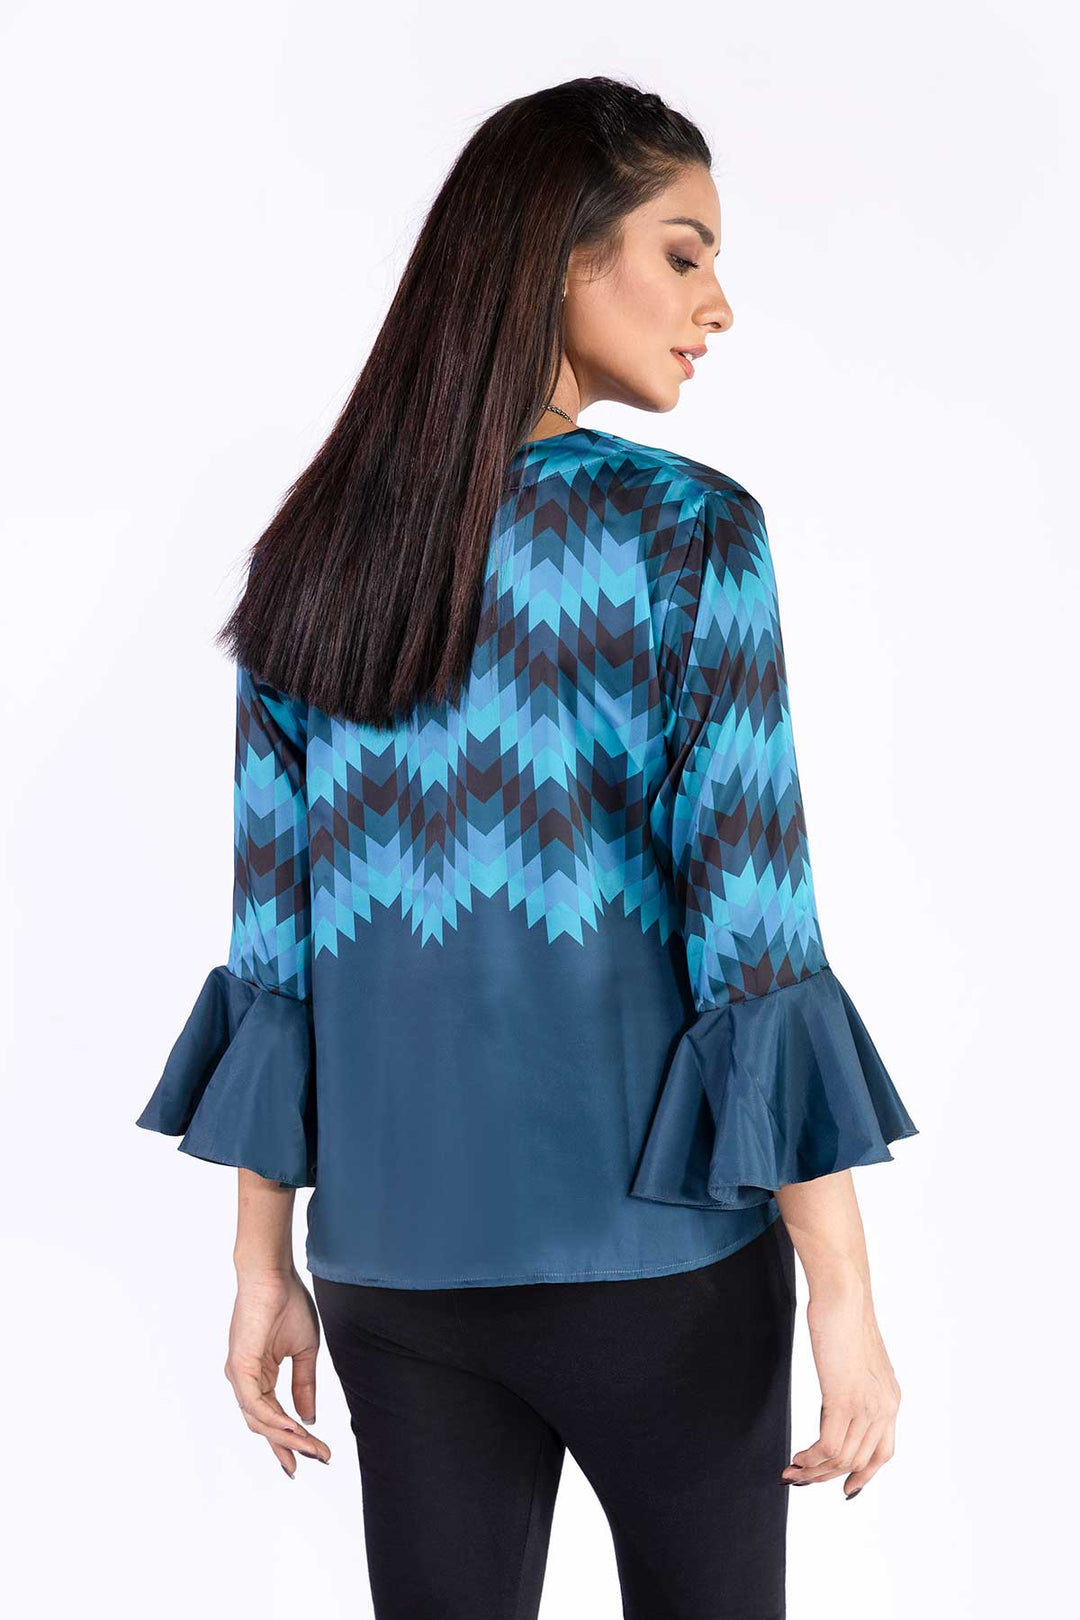 Aztec Flared Sleeves Top - A21 - WWT0007